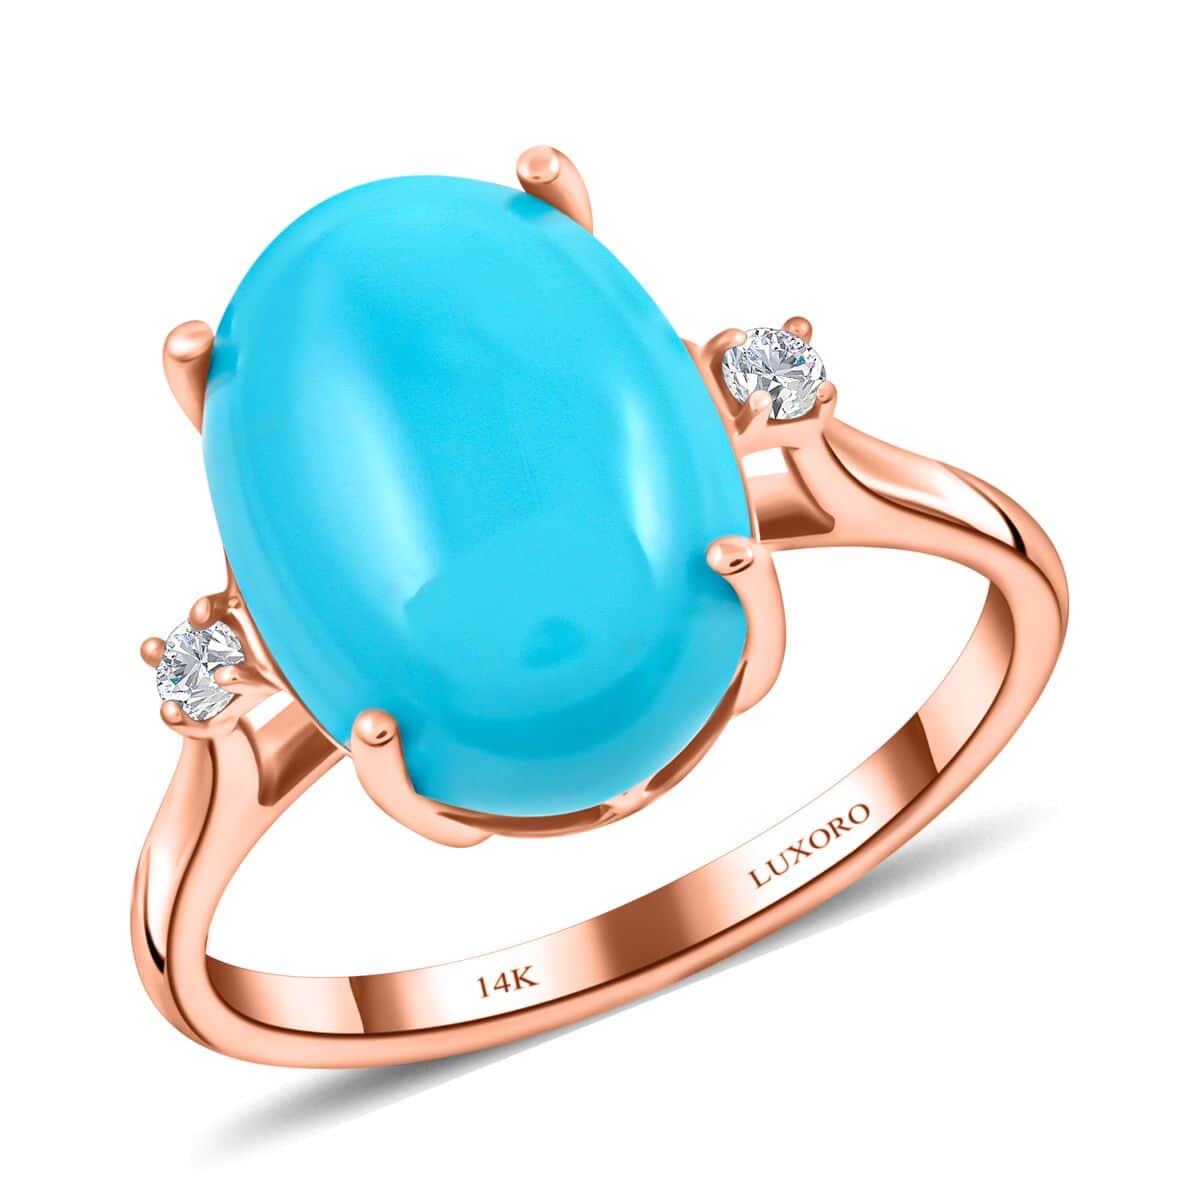 Certified & Appraised Luxoro 10K Rose Gold AAA Sleeping Beauty Turquoise and I2 Diamond Ring 5.50 ctw (Del. in 7-10 Days) image number 0